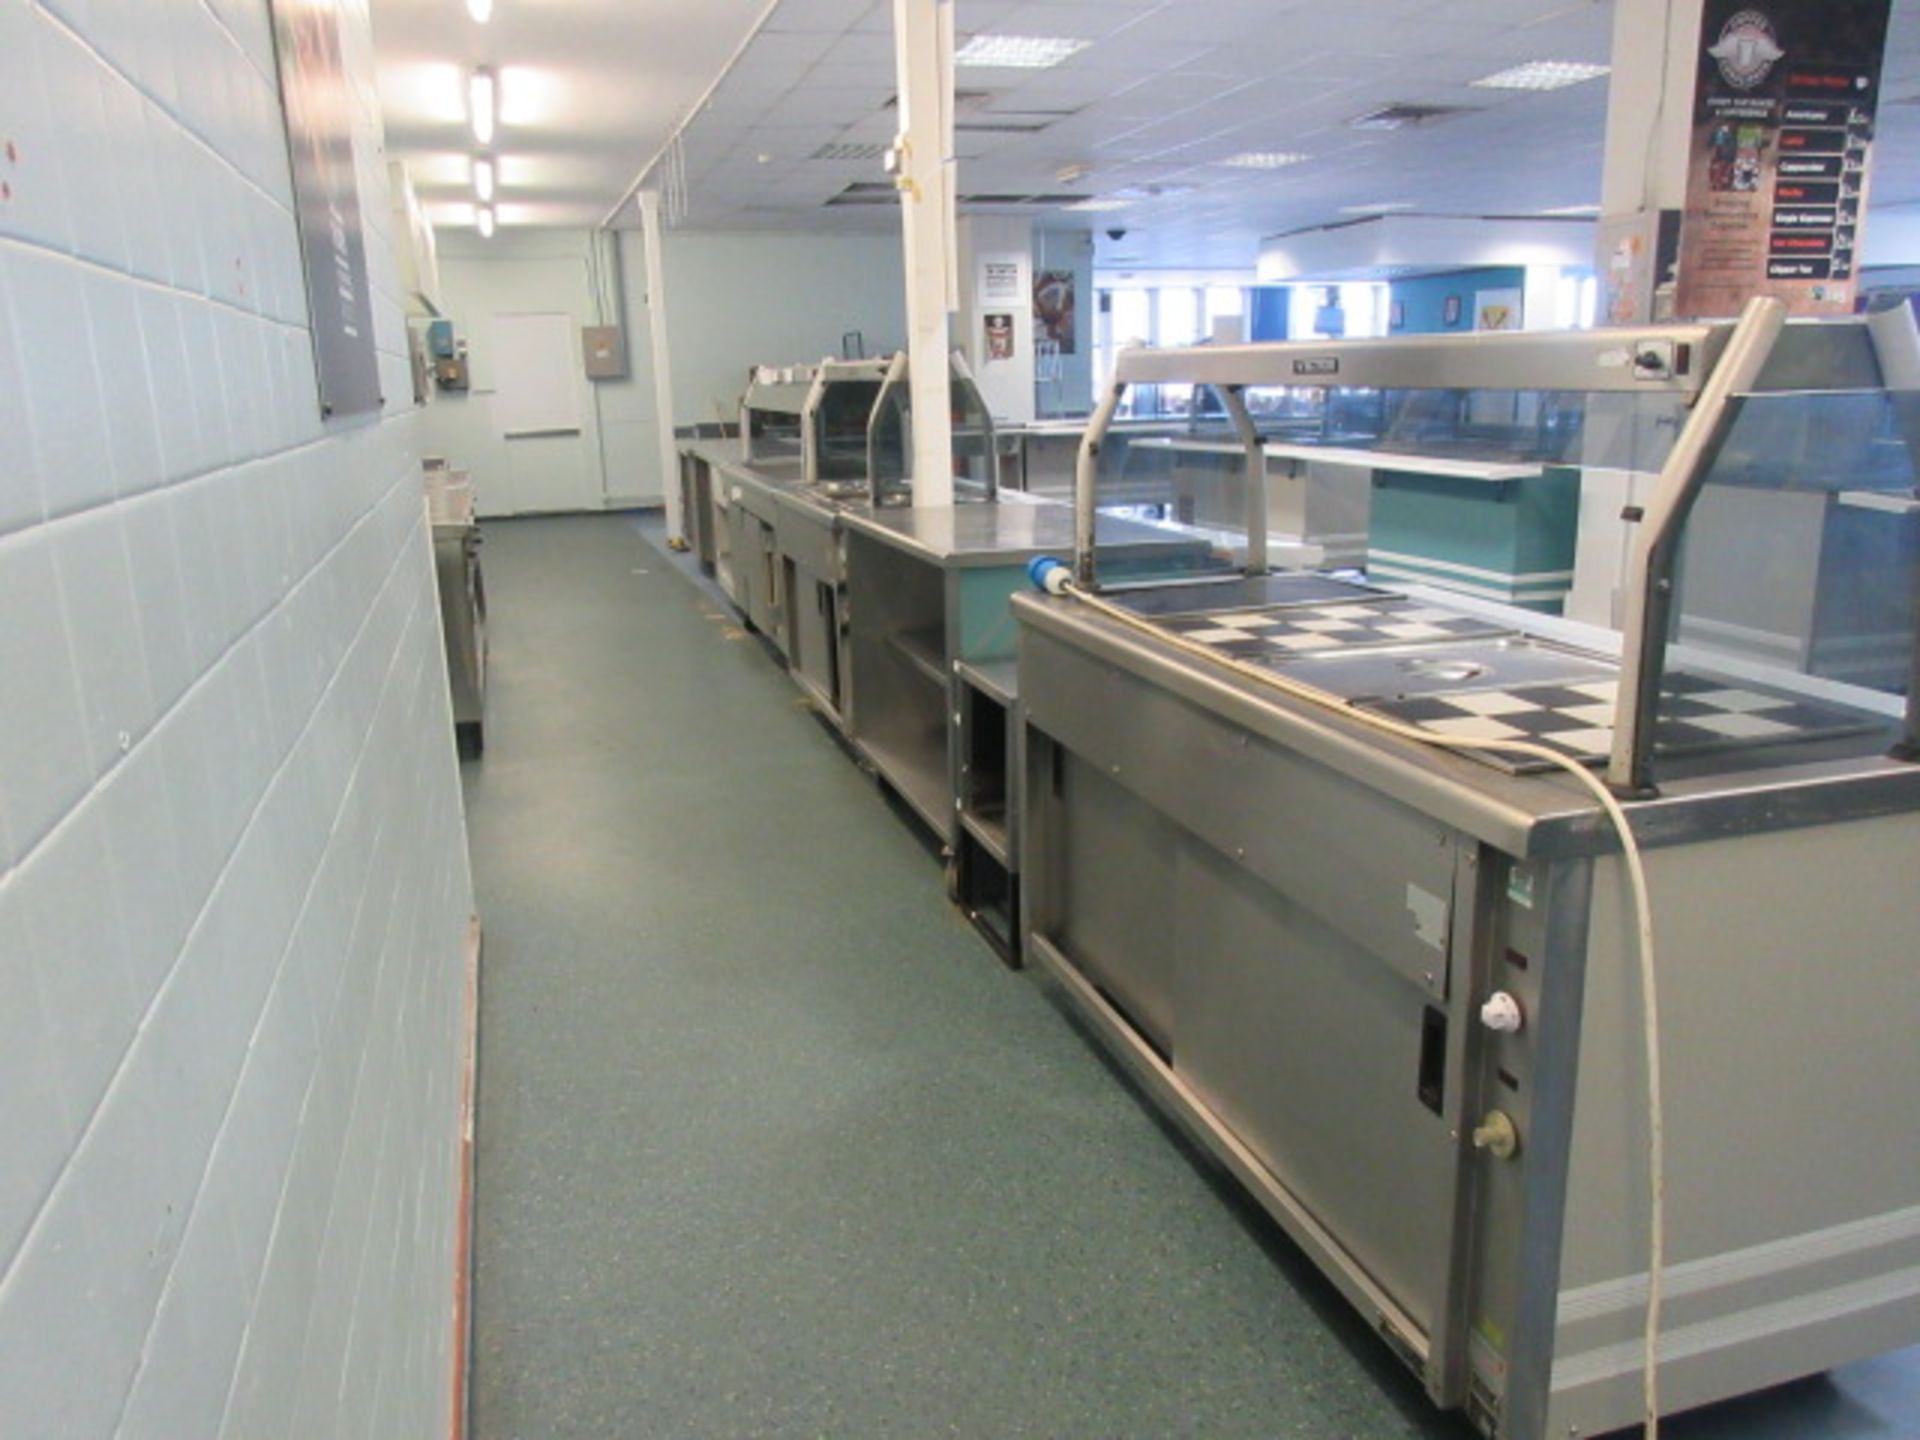 VICTOR 7 UNIT BAIN MARIE WITH TRAY SHELF. FOUR STORAGE UNITS, REFRIGERATED UNIT, HEATED 7 POT - Image 2 of 6